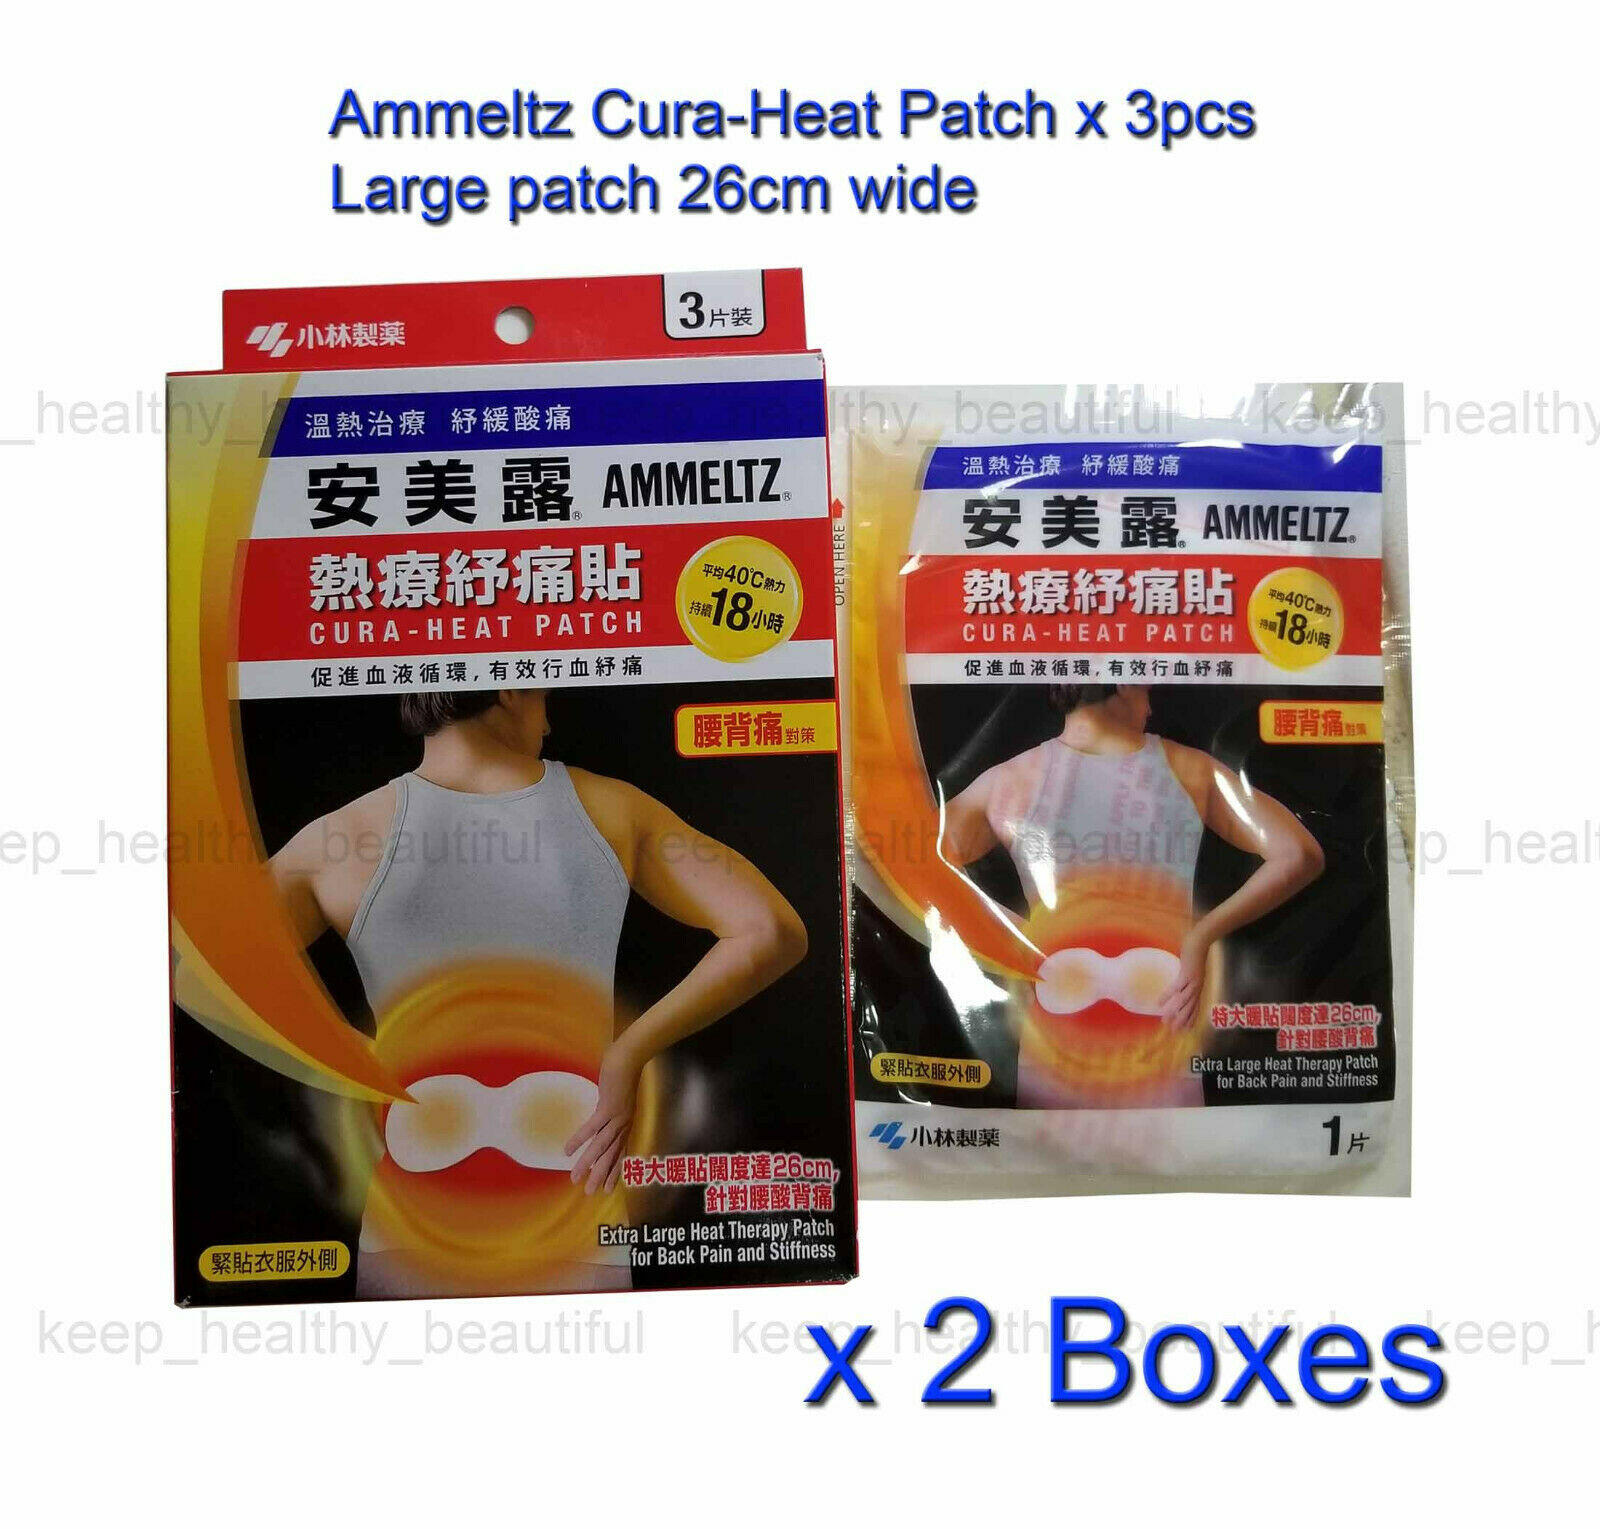 2 Boxes of 3 Patch JAPAN KOBAYASHI AMMELTZ CURA-HEAT LARGE HEAT THERAPY PATCH FOR BACK PAIN AND STIFFNESS